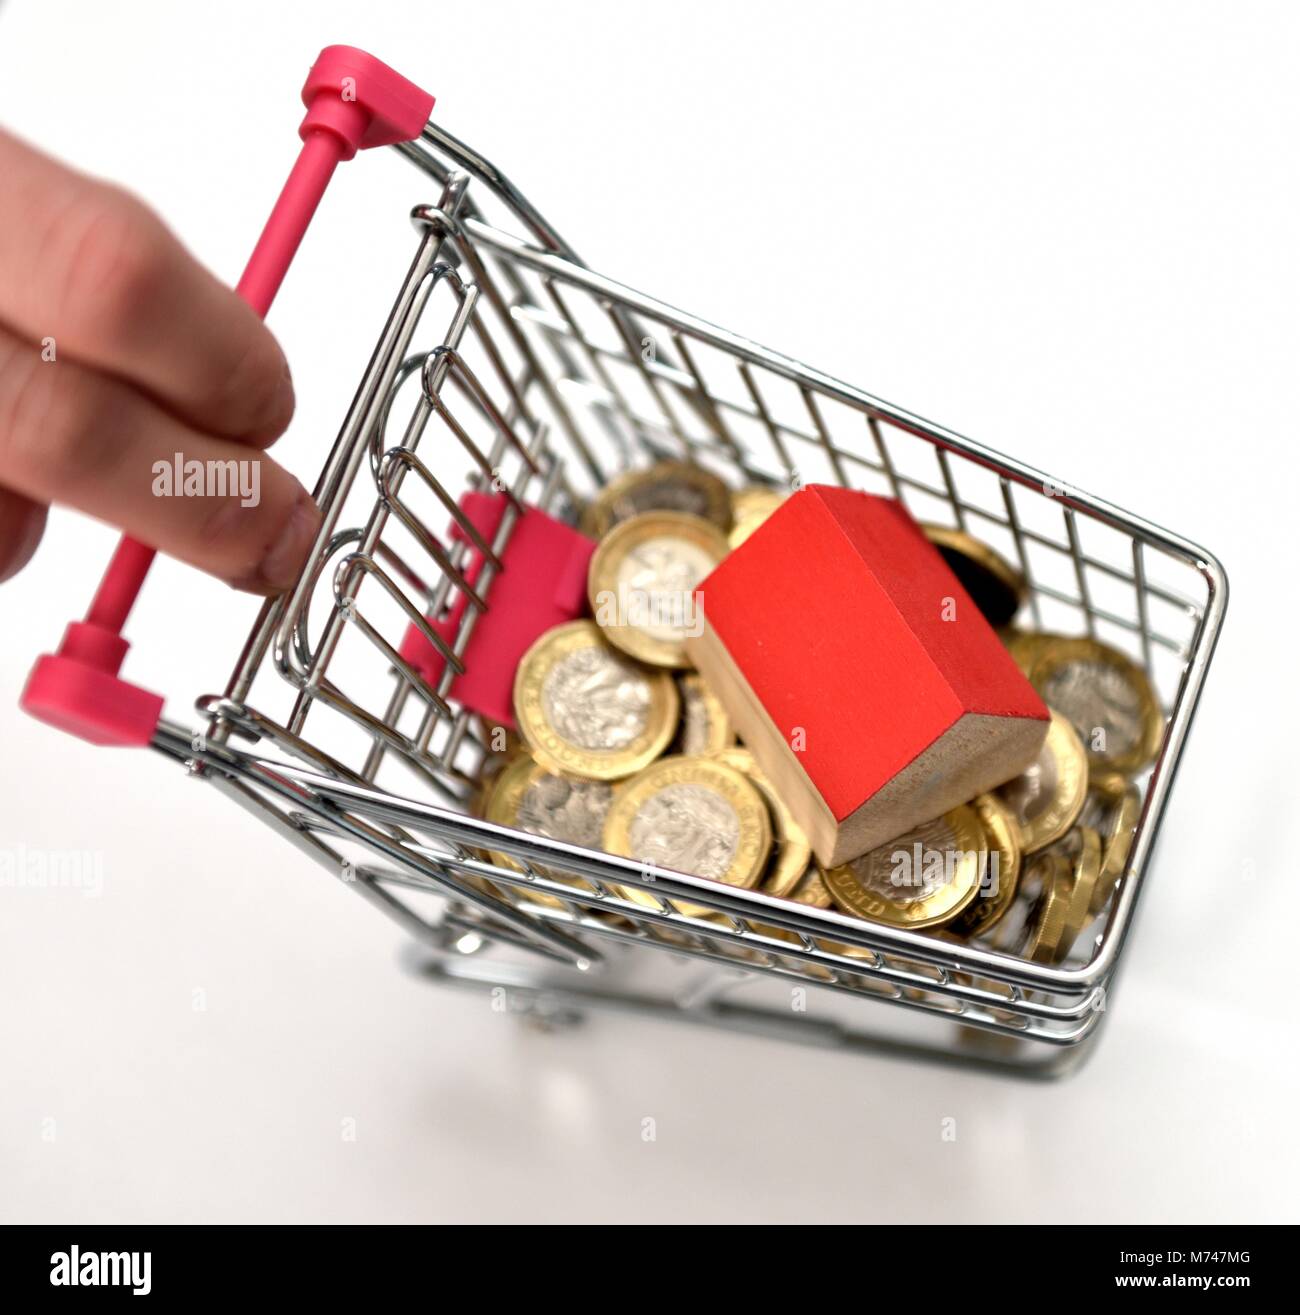 A small house in a miniature shopping trolley with one pound coins house buying concept Stock Photo